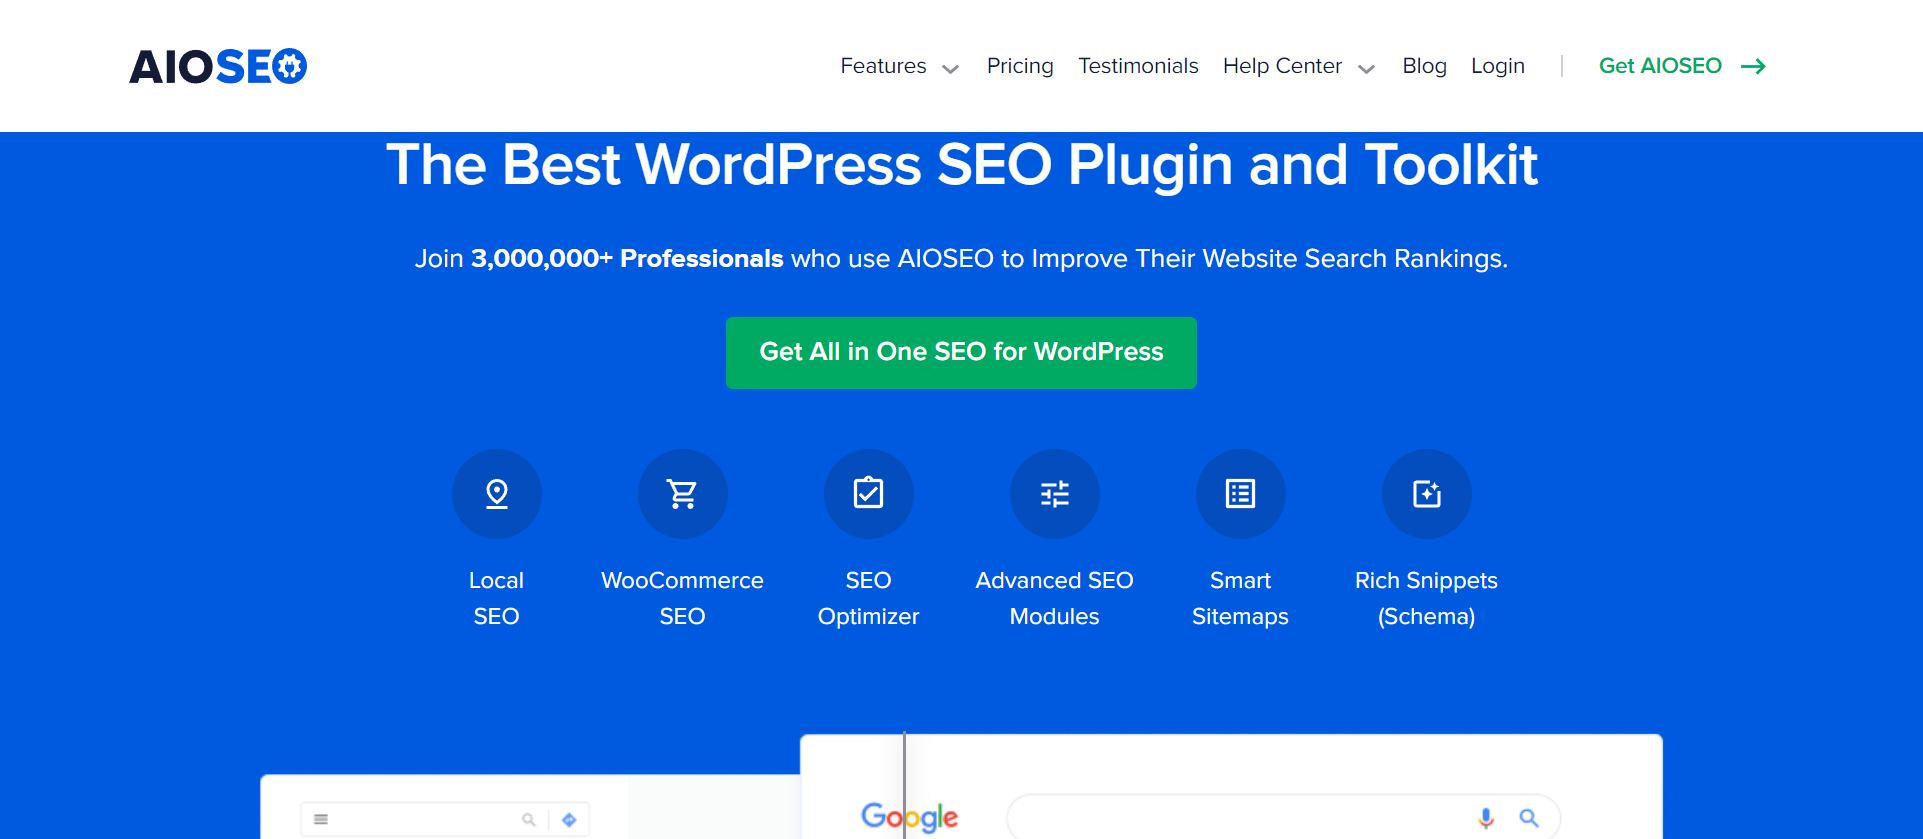 All in One SEO tool